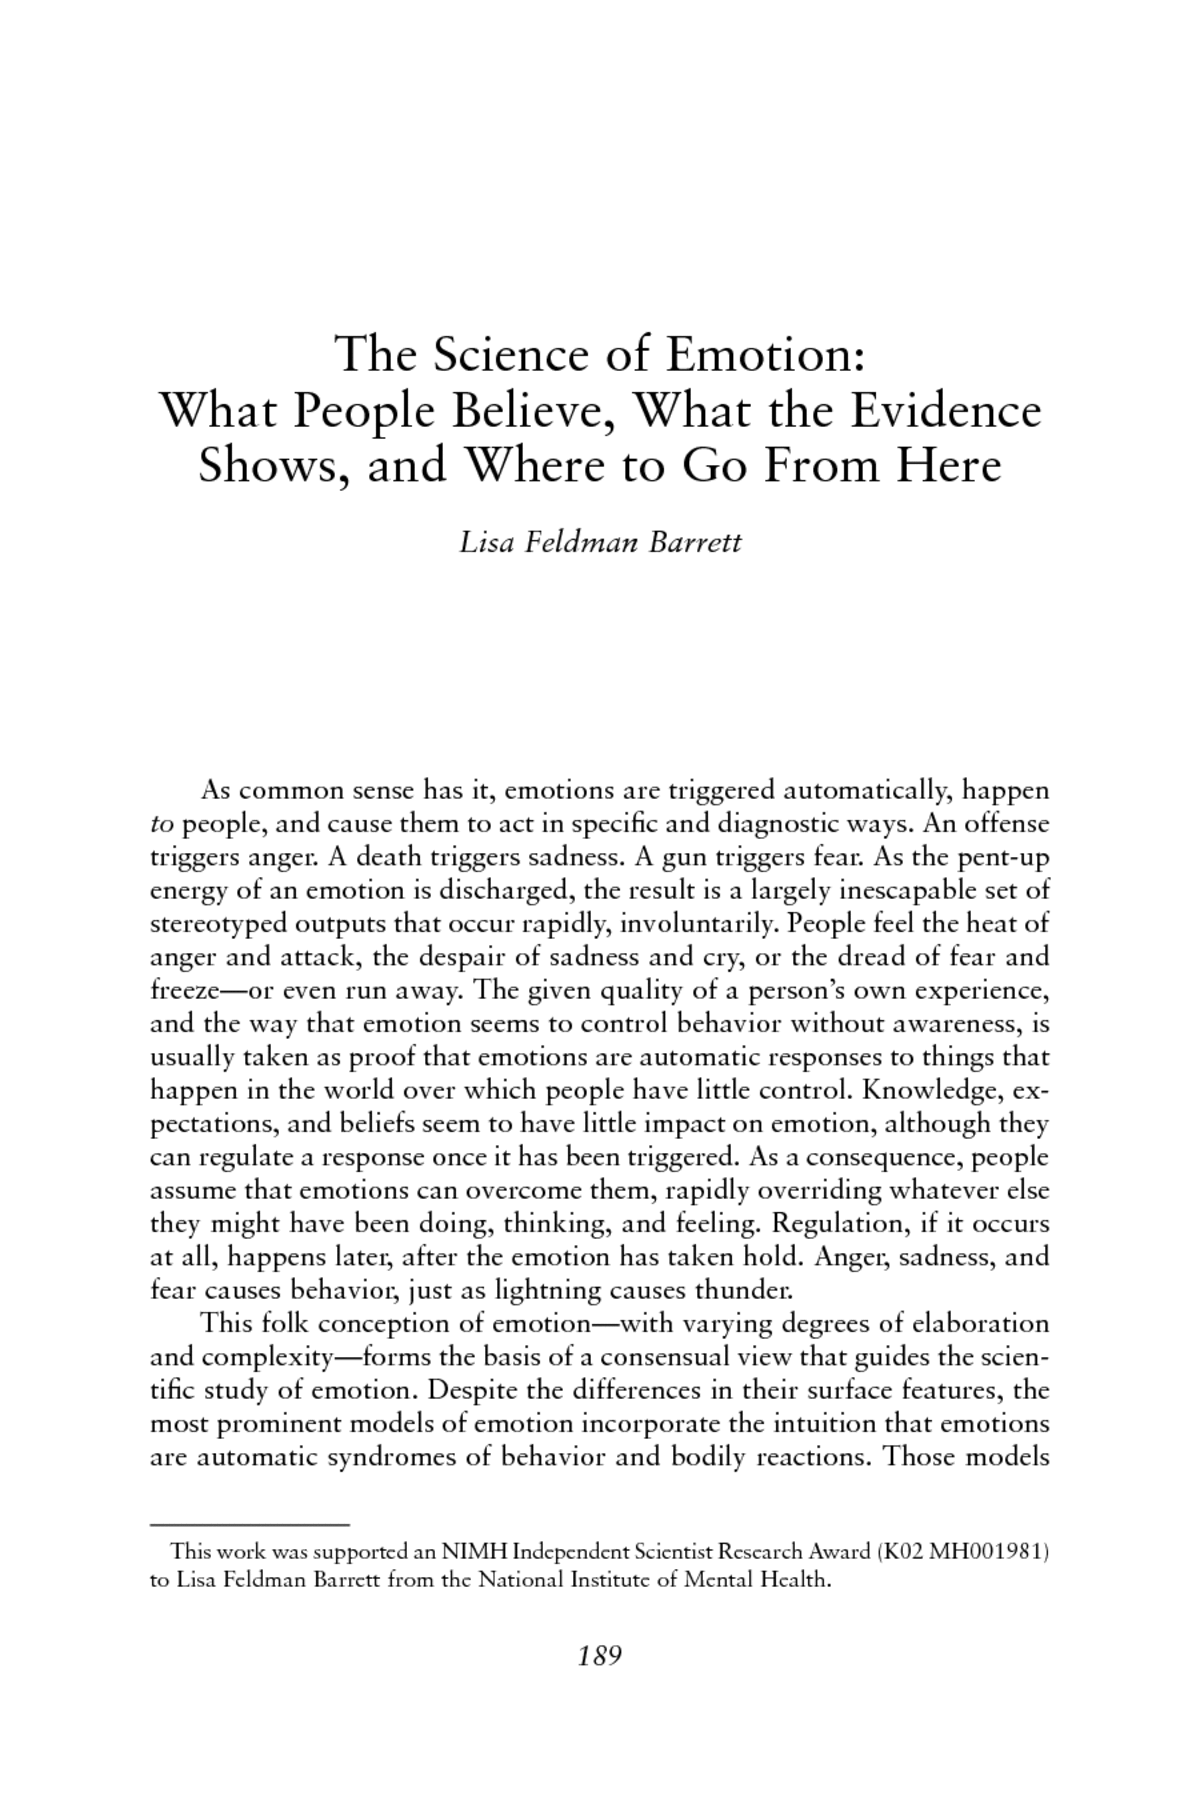 The Science of Emotion: What People Believe, What the Evidence Shows, and  Where to Go From Here--Lisa Feldman Barrett, Human Behavior in Military  Contexts